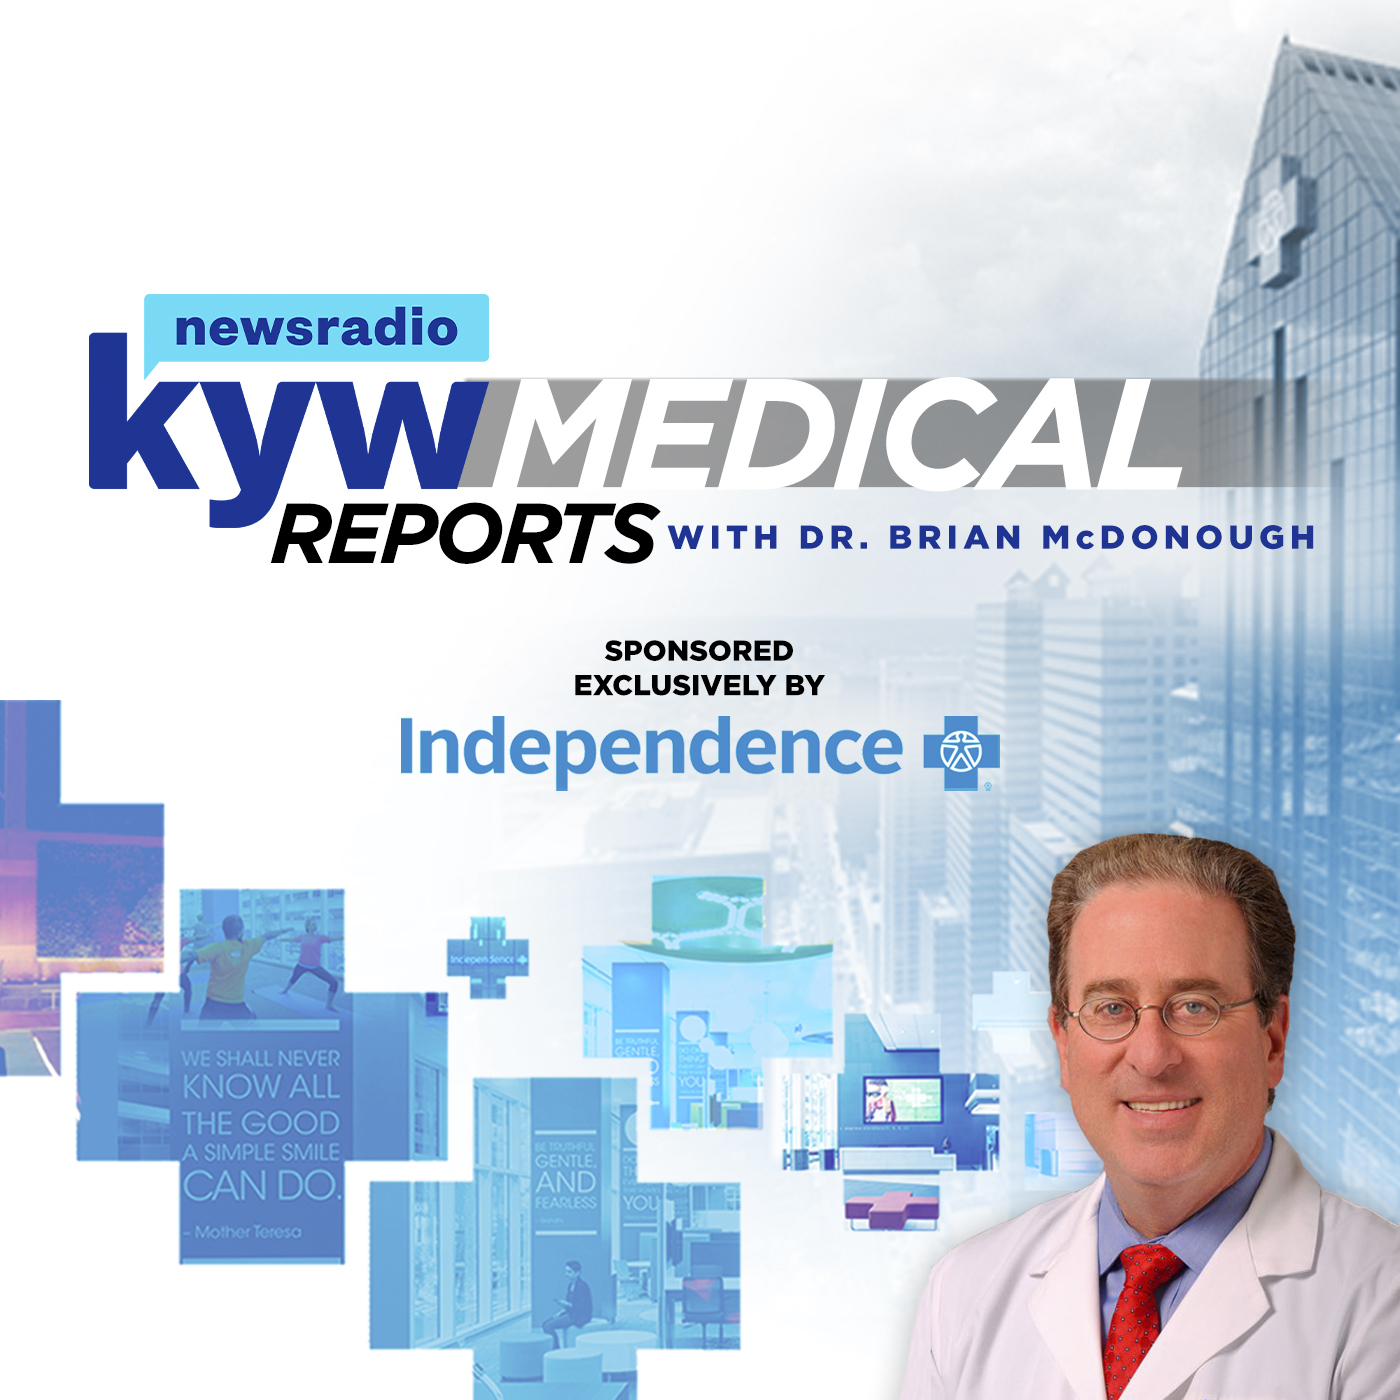 Medical Report: 15% of Americans report some trouble hearing